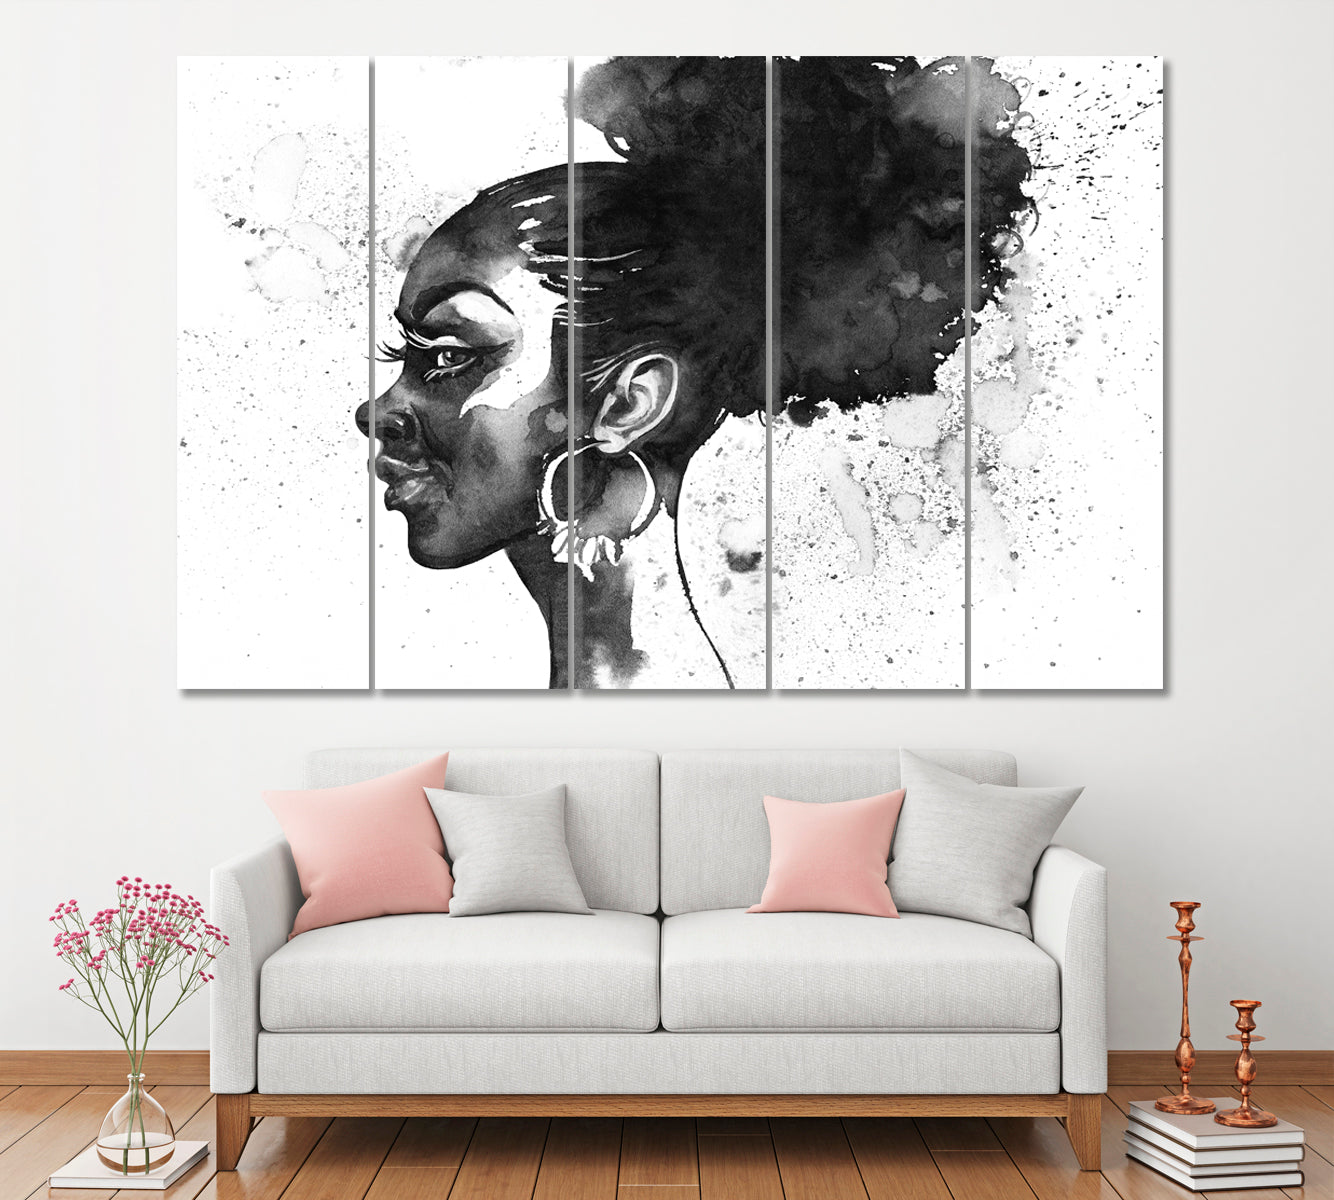 African Woman Portrait Canvas Print ArtLexy 5 Panels 36"x24" inches 